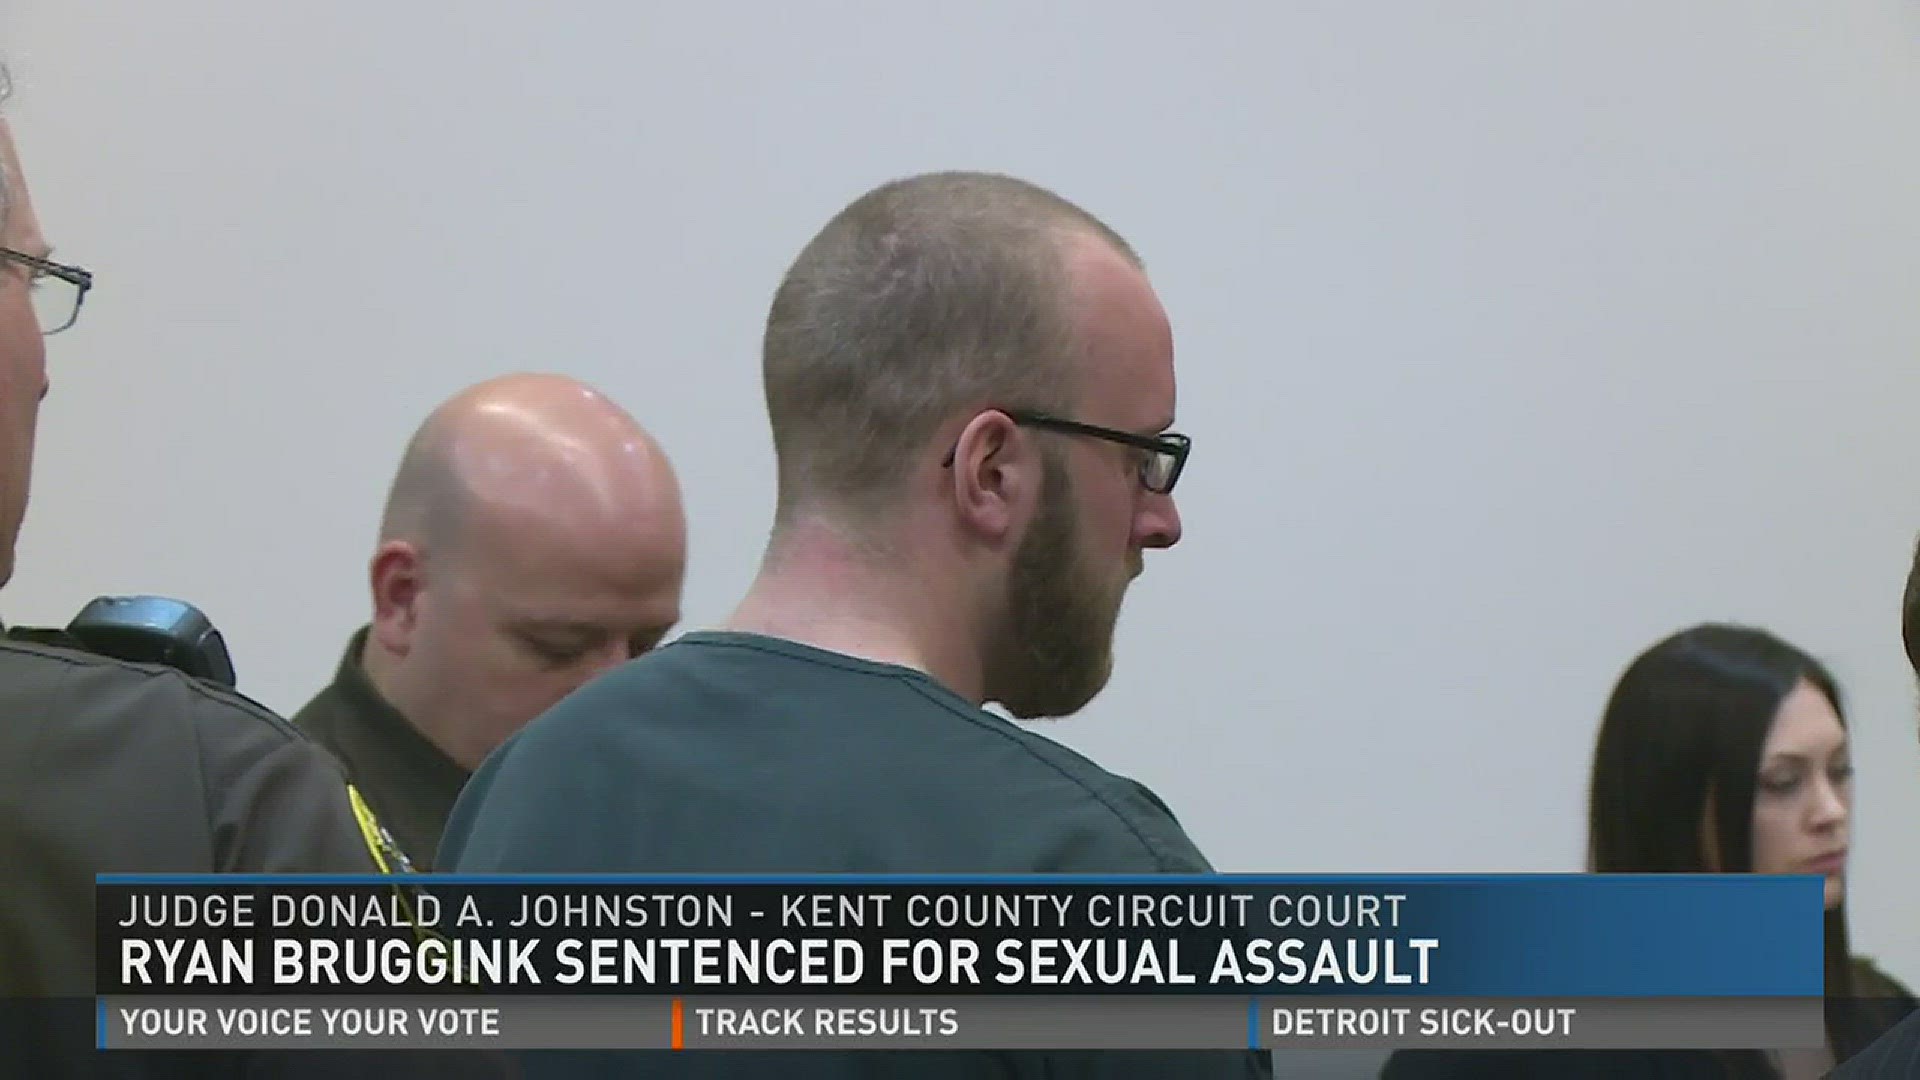 Ryan Bruggink made a tearful apology before being sentenced to between two and 15 years in prison.